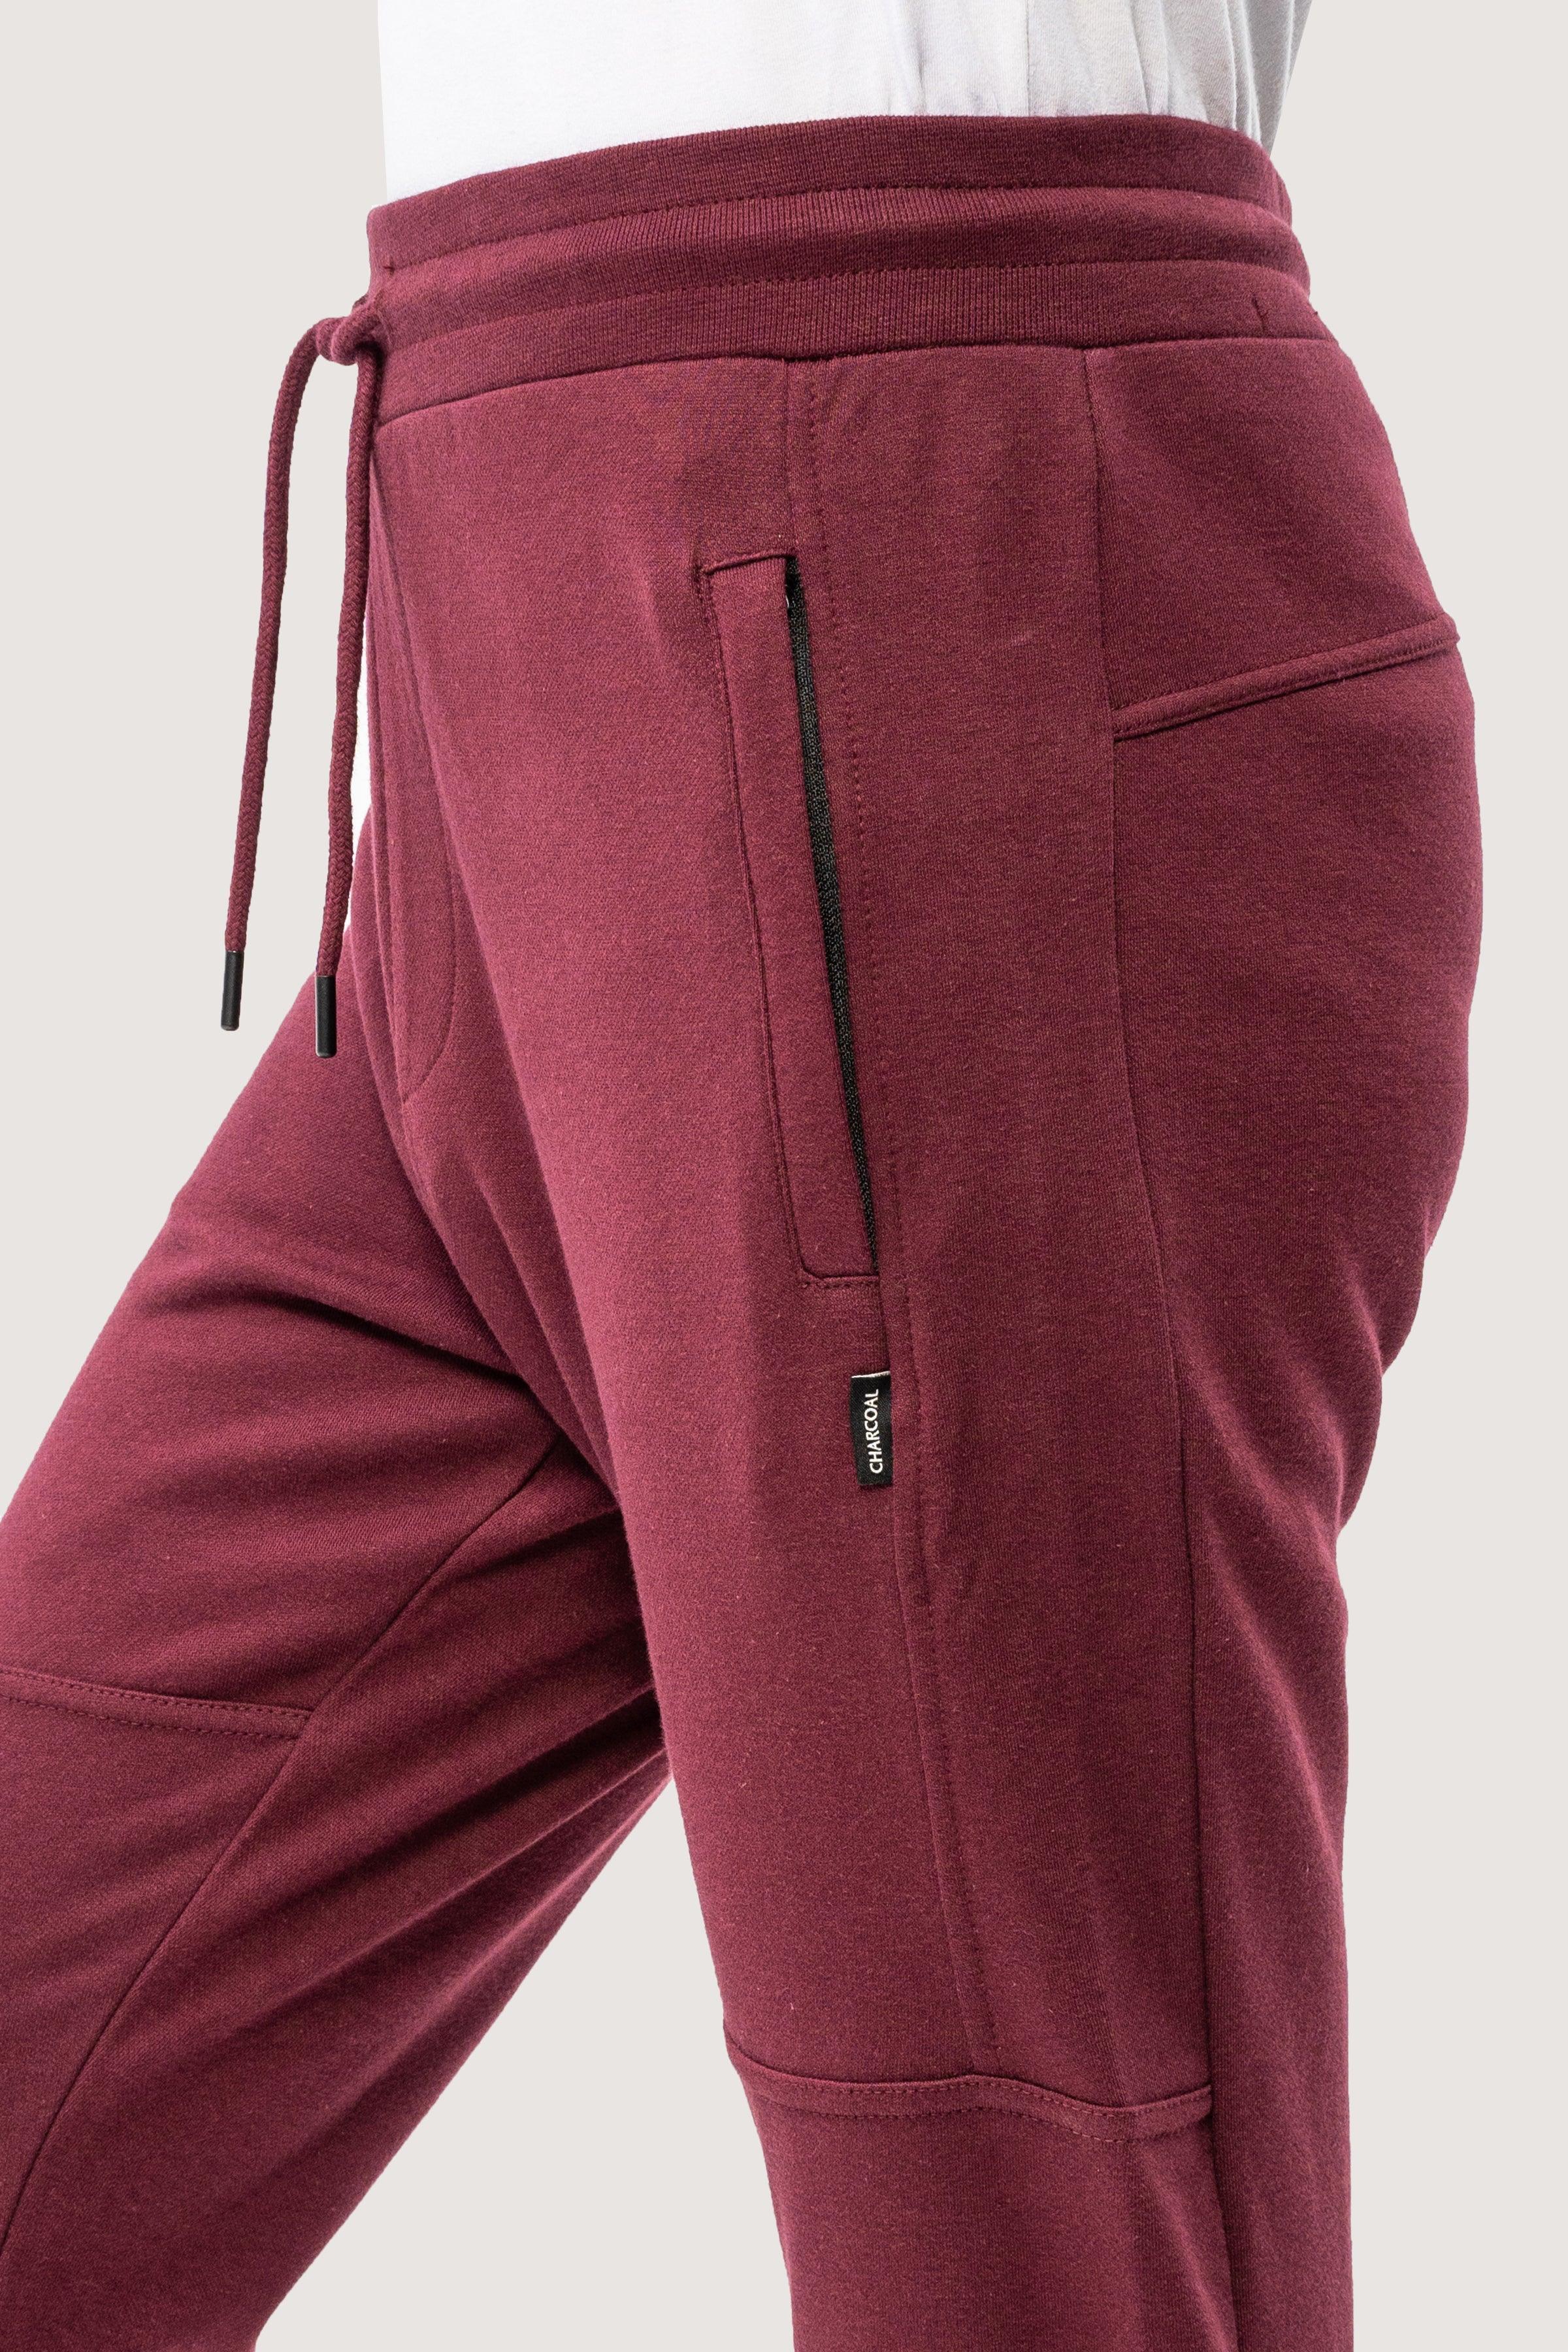 PIQUE INTERLOCK SLIMFIT TROUSER MAROON at Charcoal Clothing